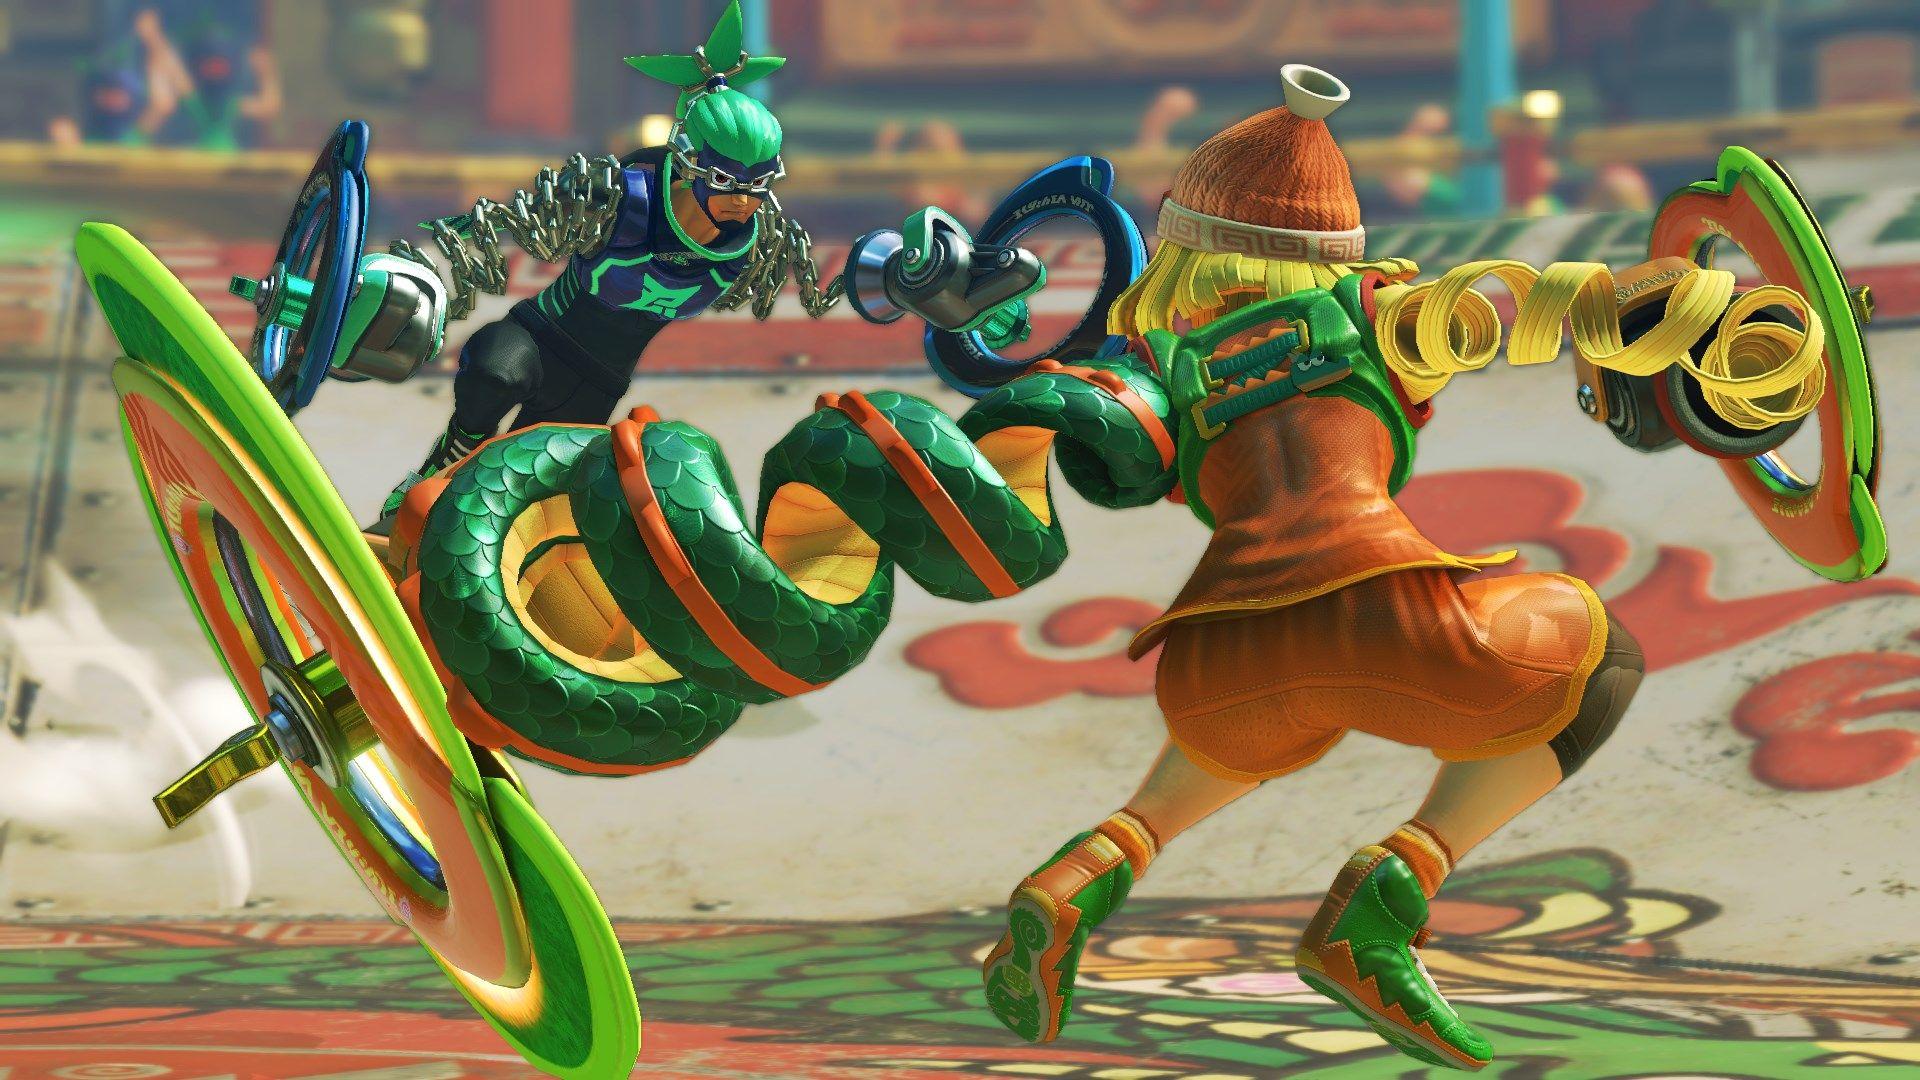 Nintendo's 'Arms' has all the depth the 'Wii Sports' games lacked